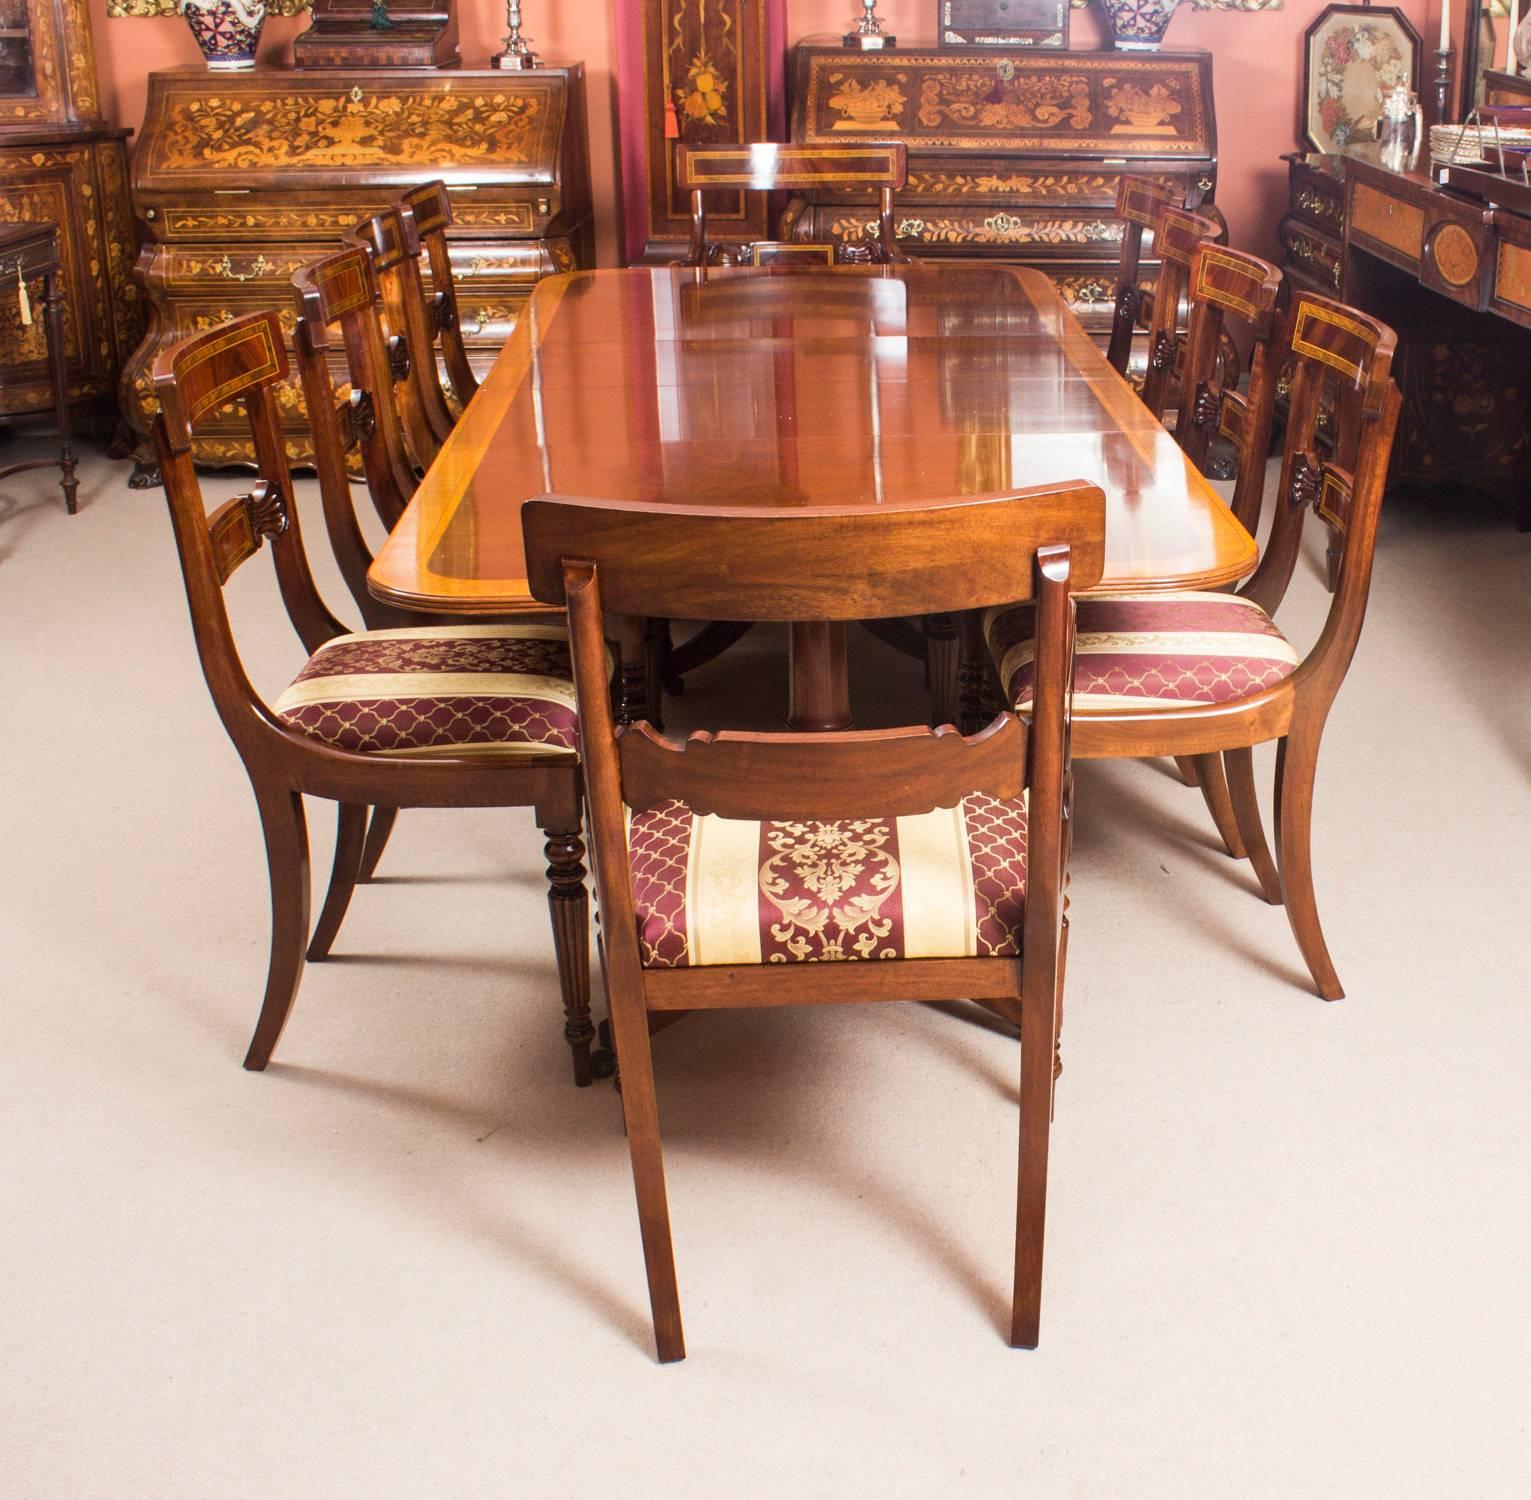 This is fabulous vintage dining set comprising a Regency style dining table by William Tillman, bought from Harrods, Knightsbridge, London in 1982 and ten matching dining chairs.

The beautiful Regency style dining table is made of solid flame